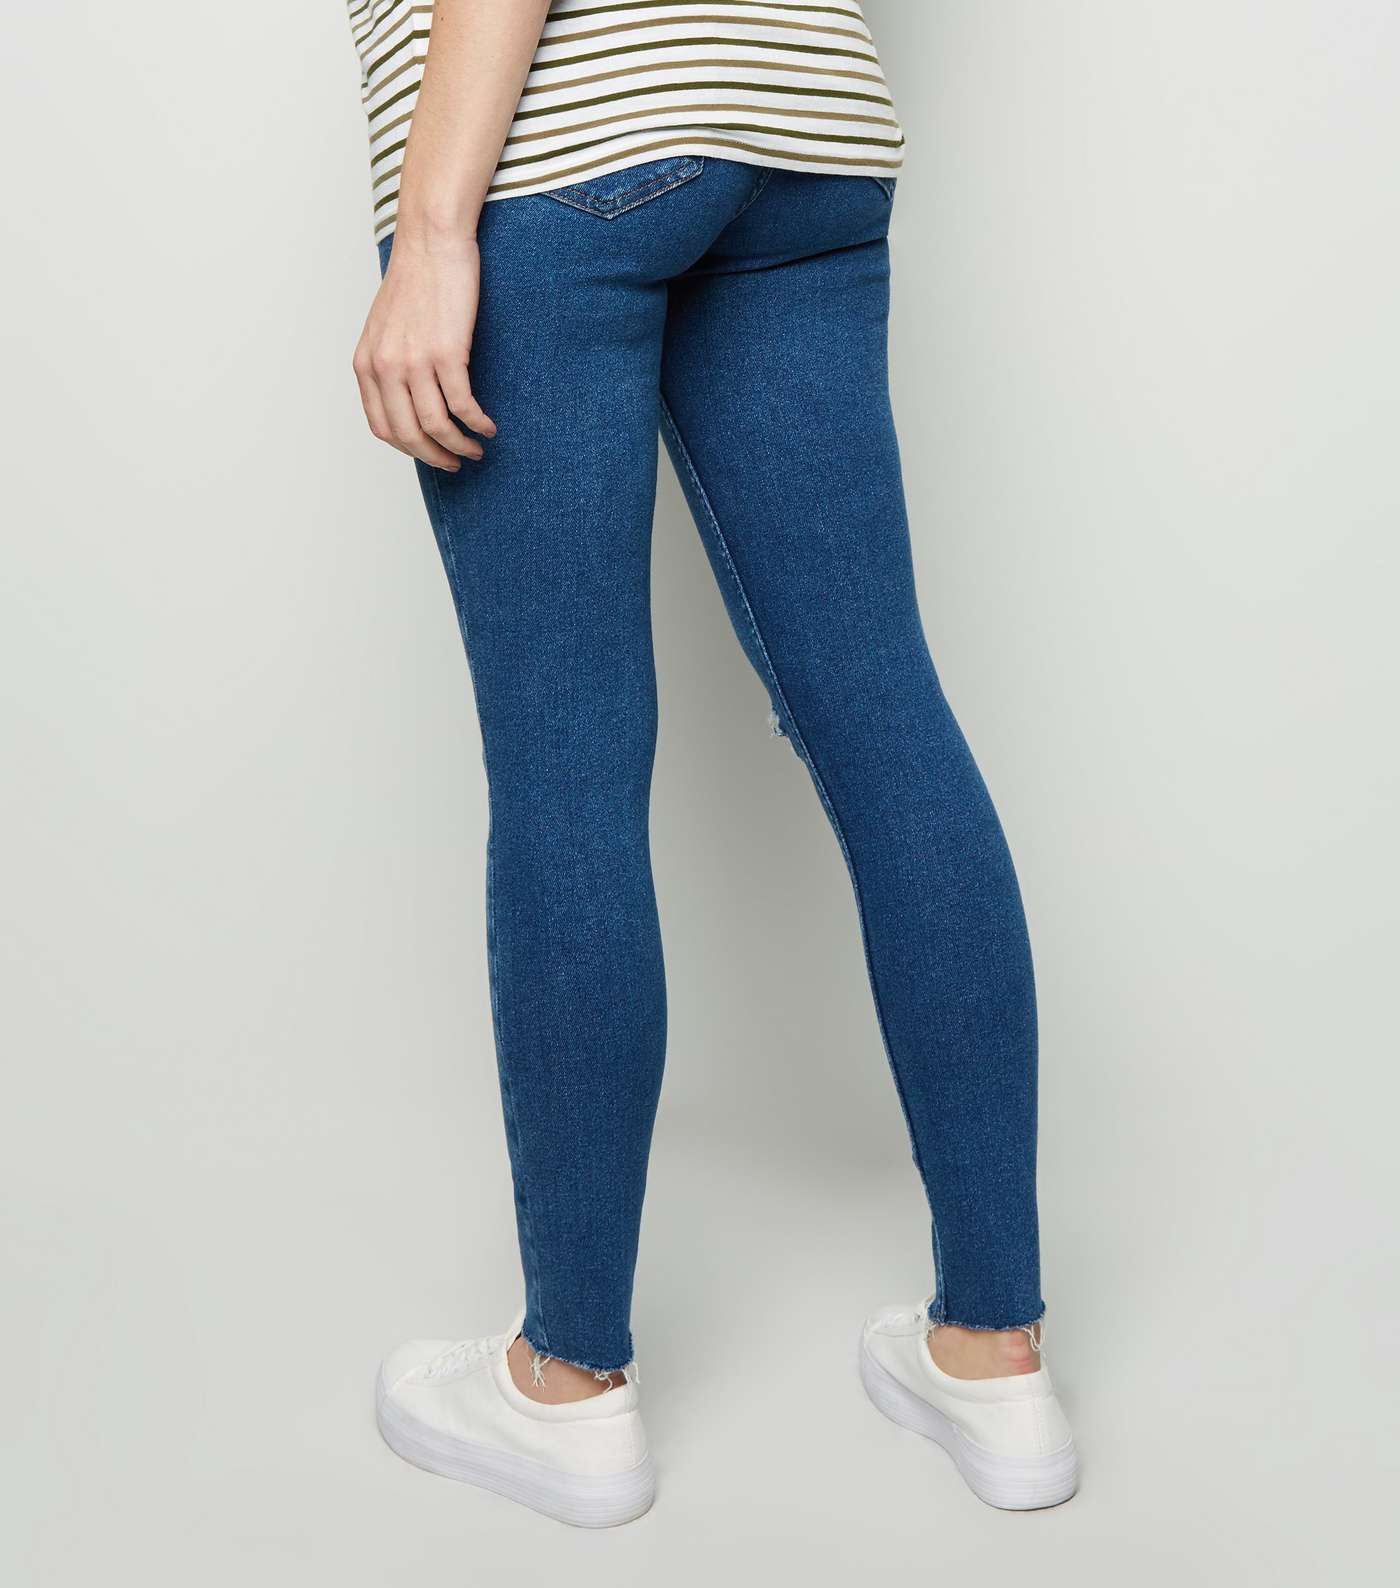 Maternity Blue Ripped Knee Over Bump Skinny Jeans Image 3